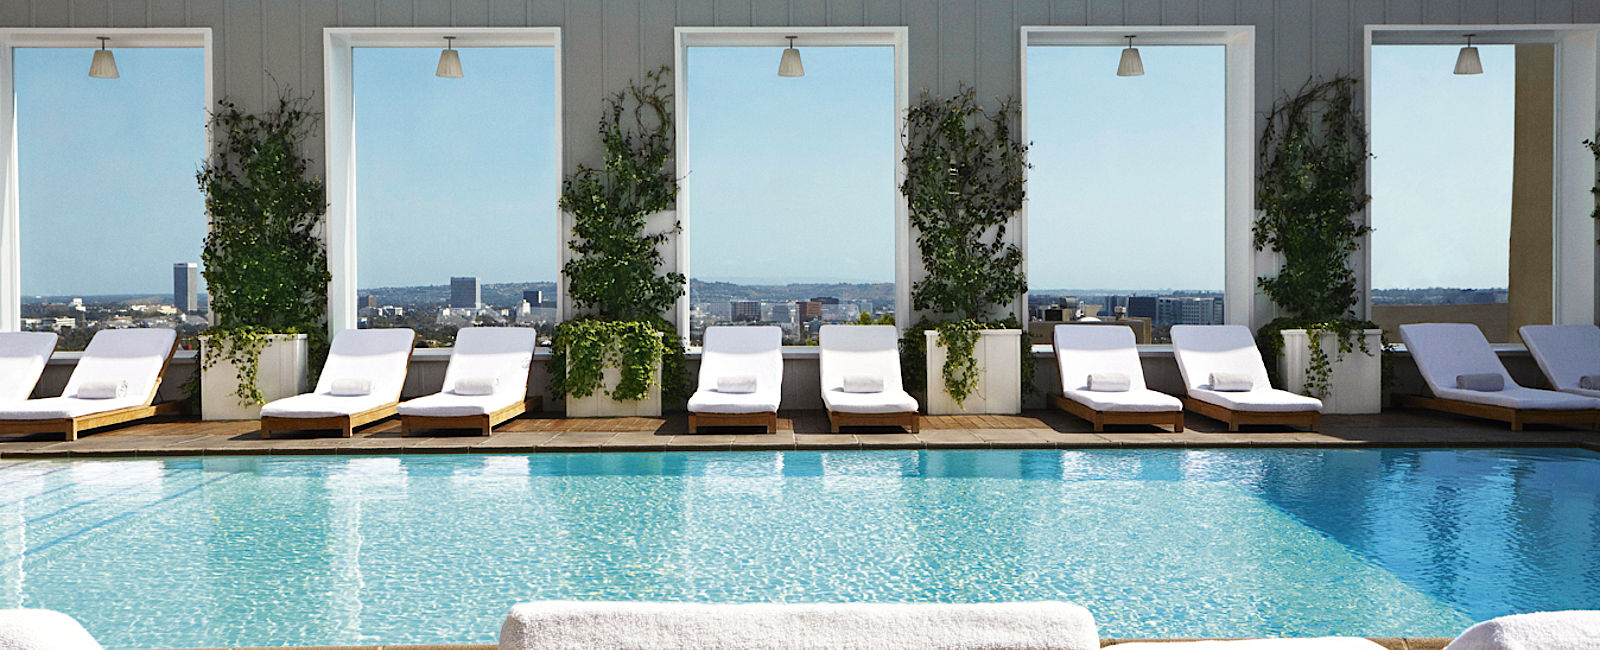 HOTELTEST
 Mondrian Los Angeles 
 Cool am pool 